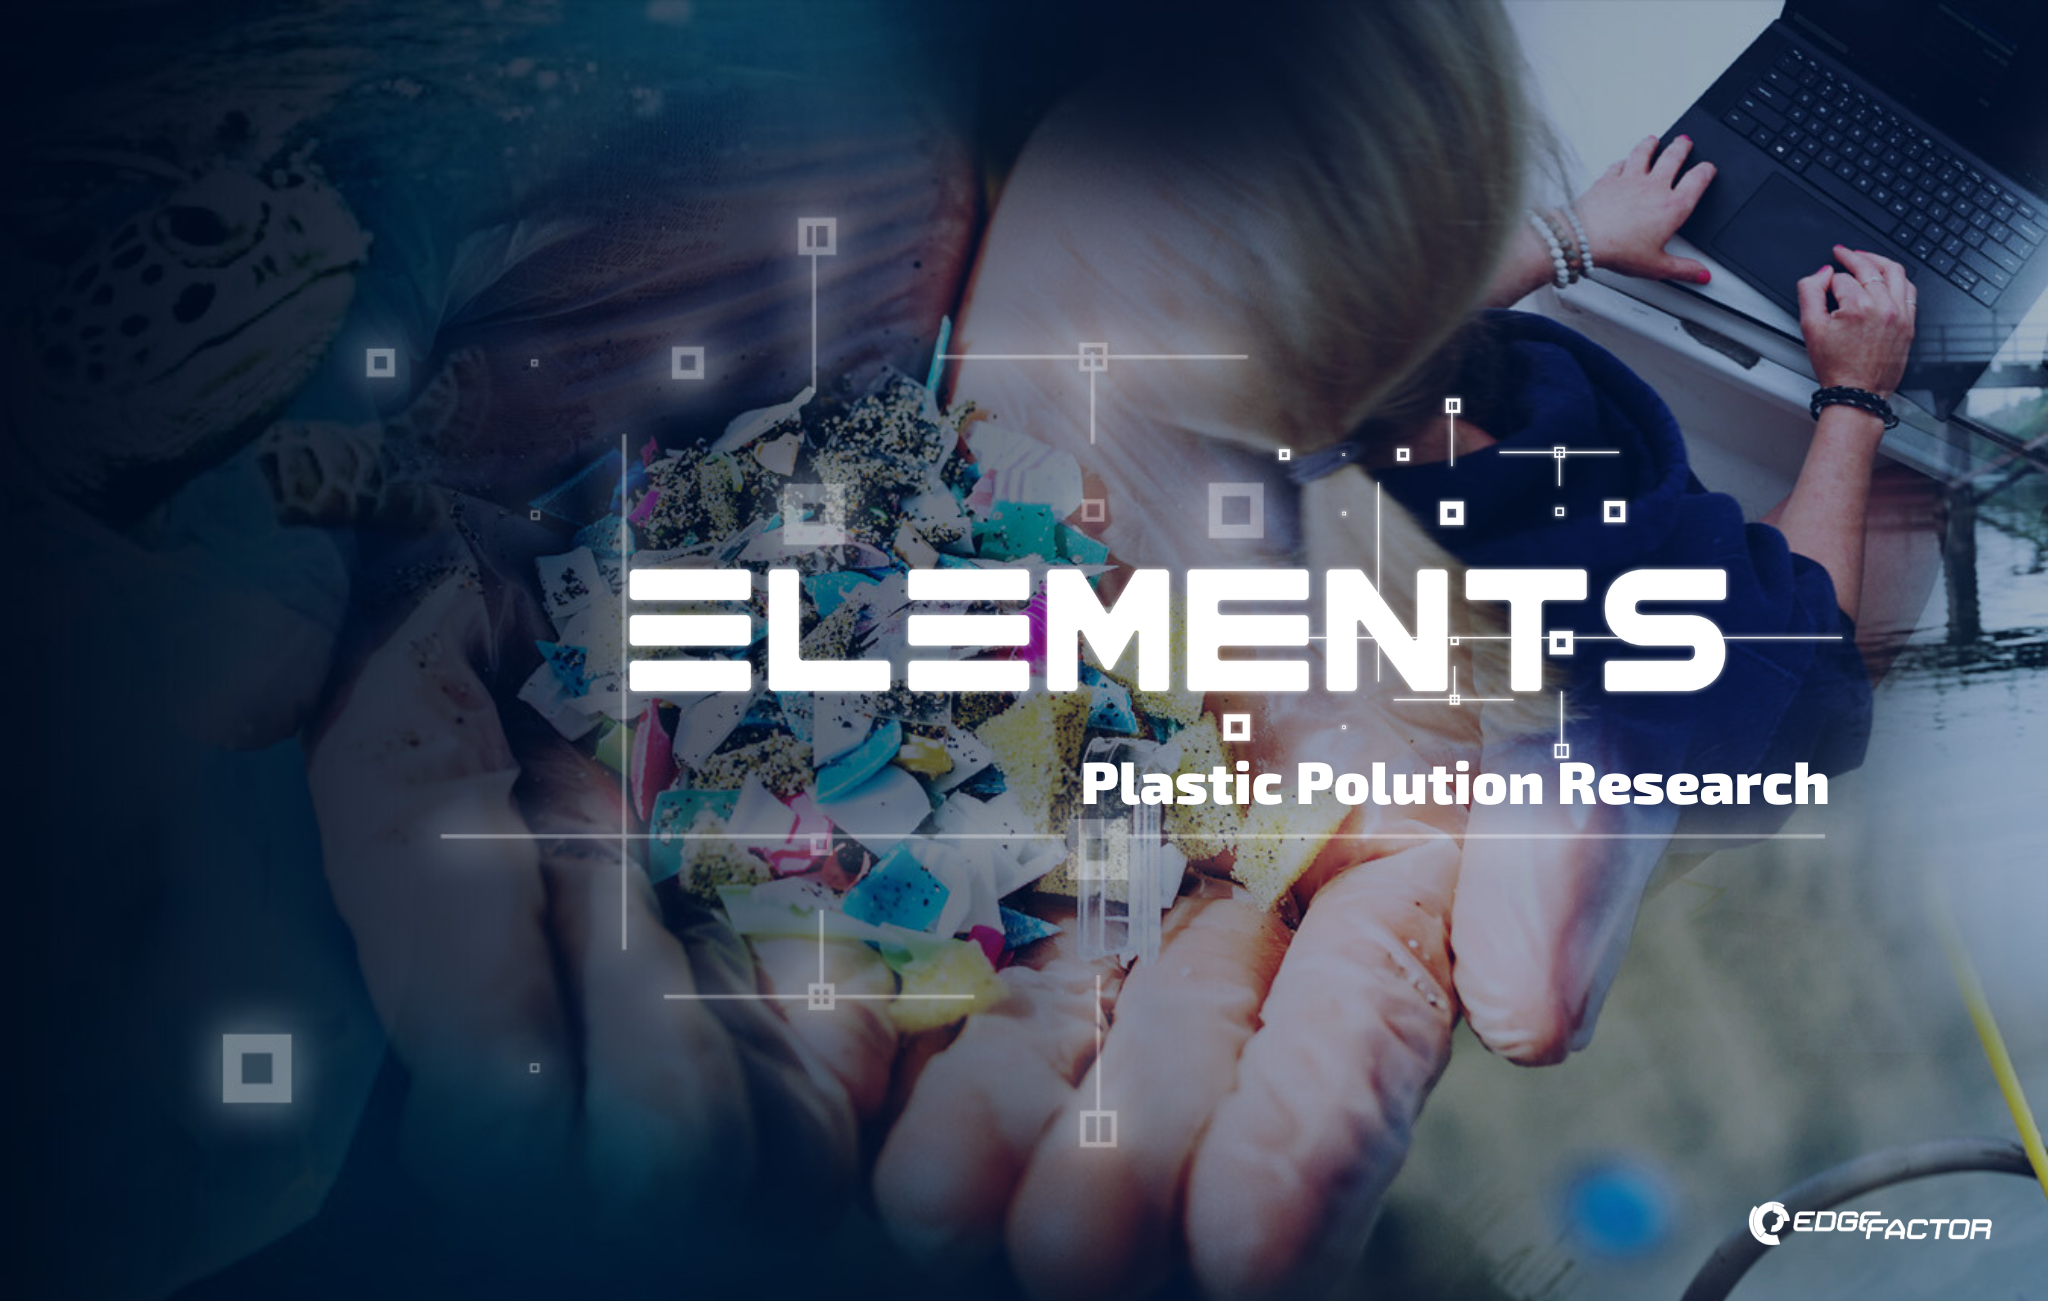 Edge Factor's new Elements episode tackles microplastic pollution in oceans.